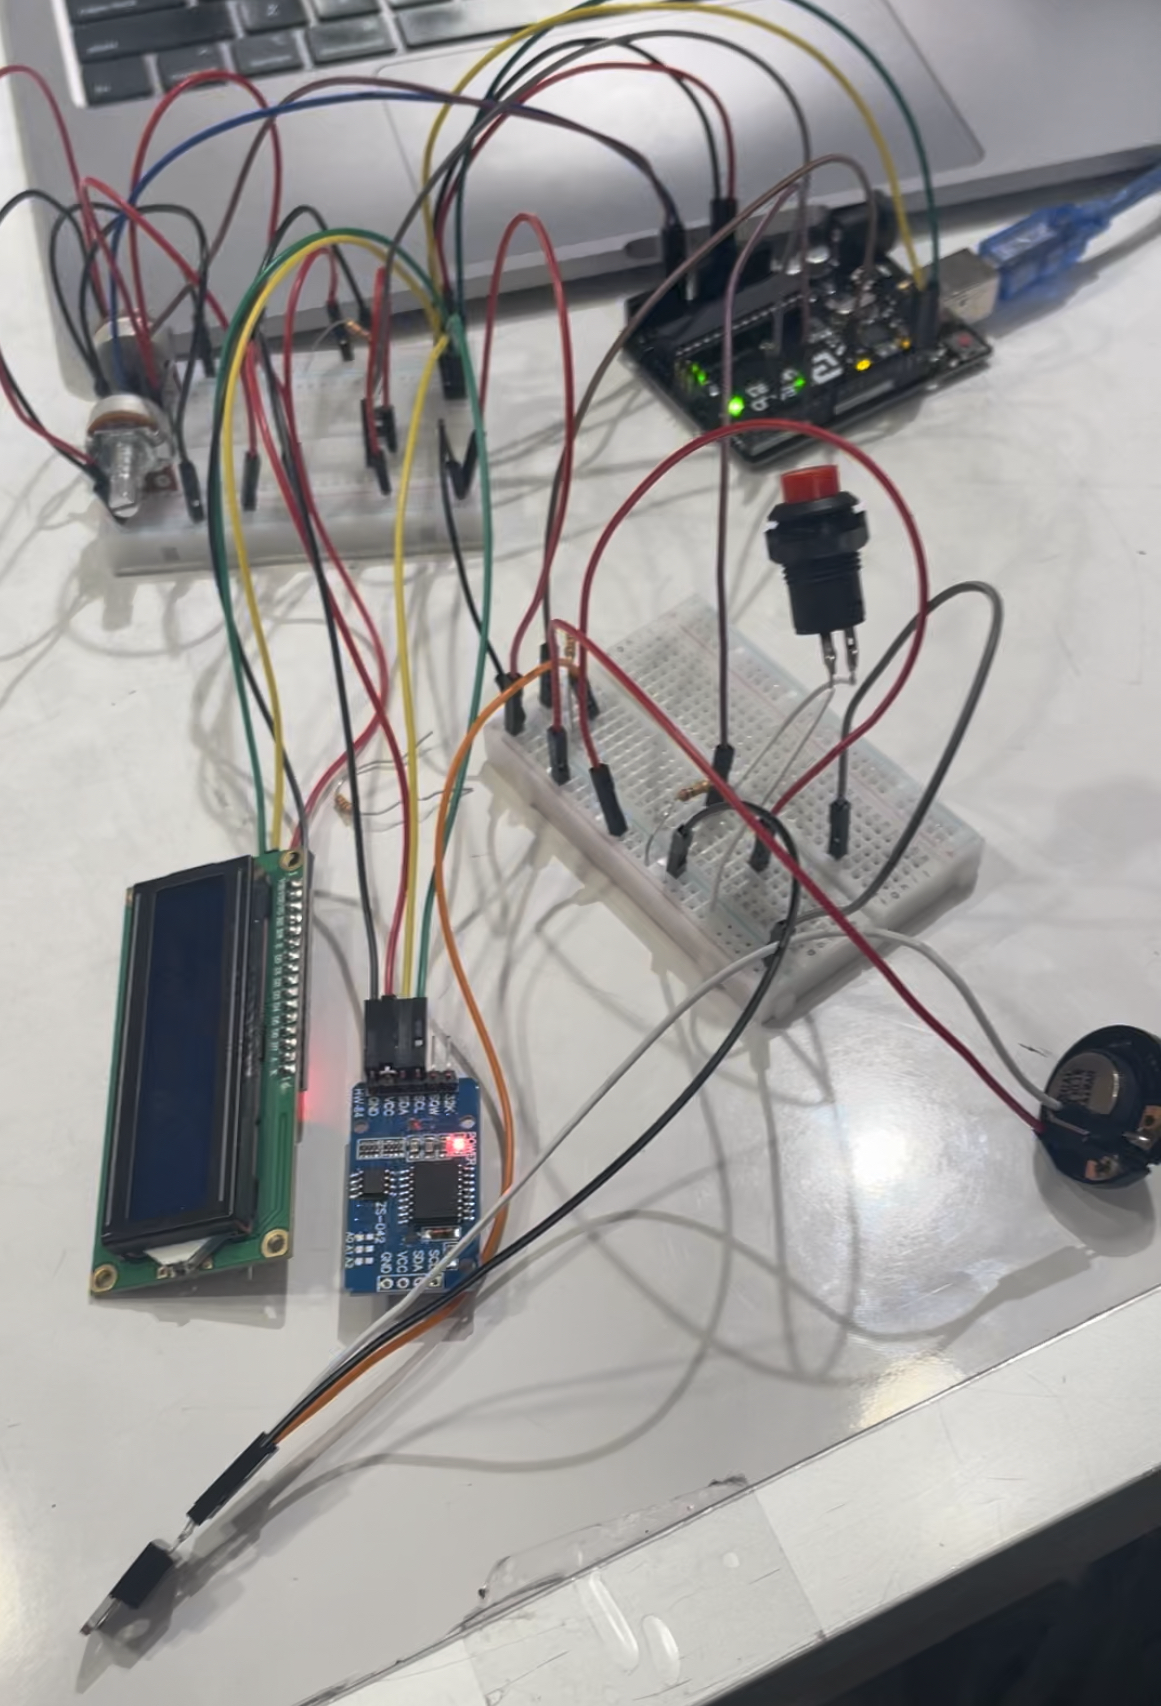 RTC module, speaker, Arduino, potentiometers, LCD Screen, and buttons connected through a breadboard